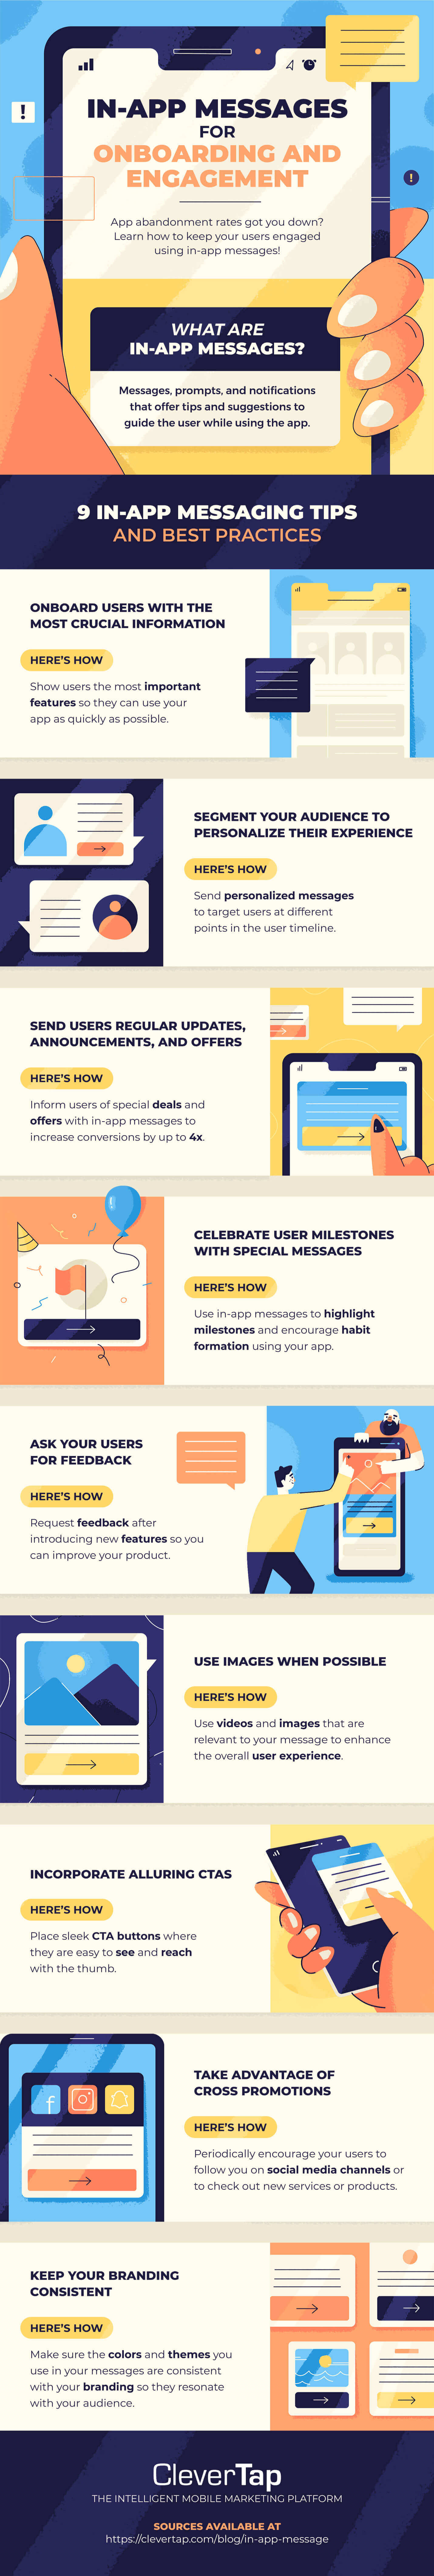 infographic with tips for mobile marketers to master in-app messages